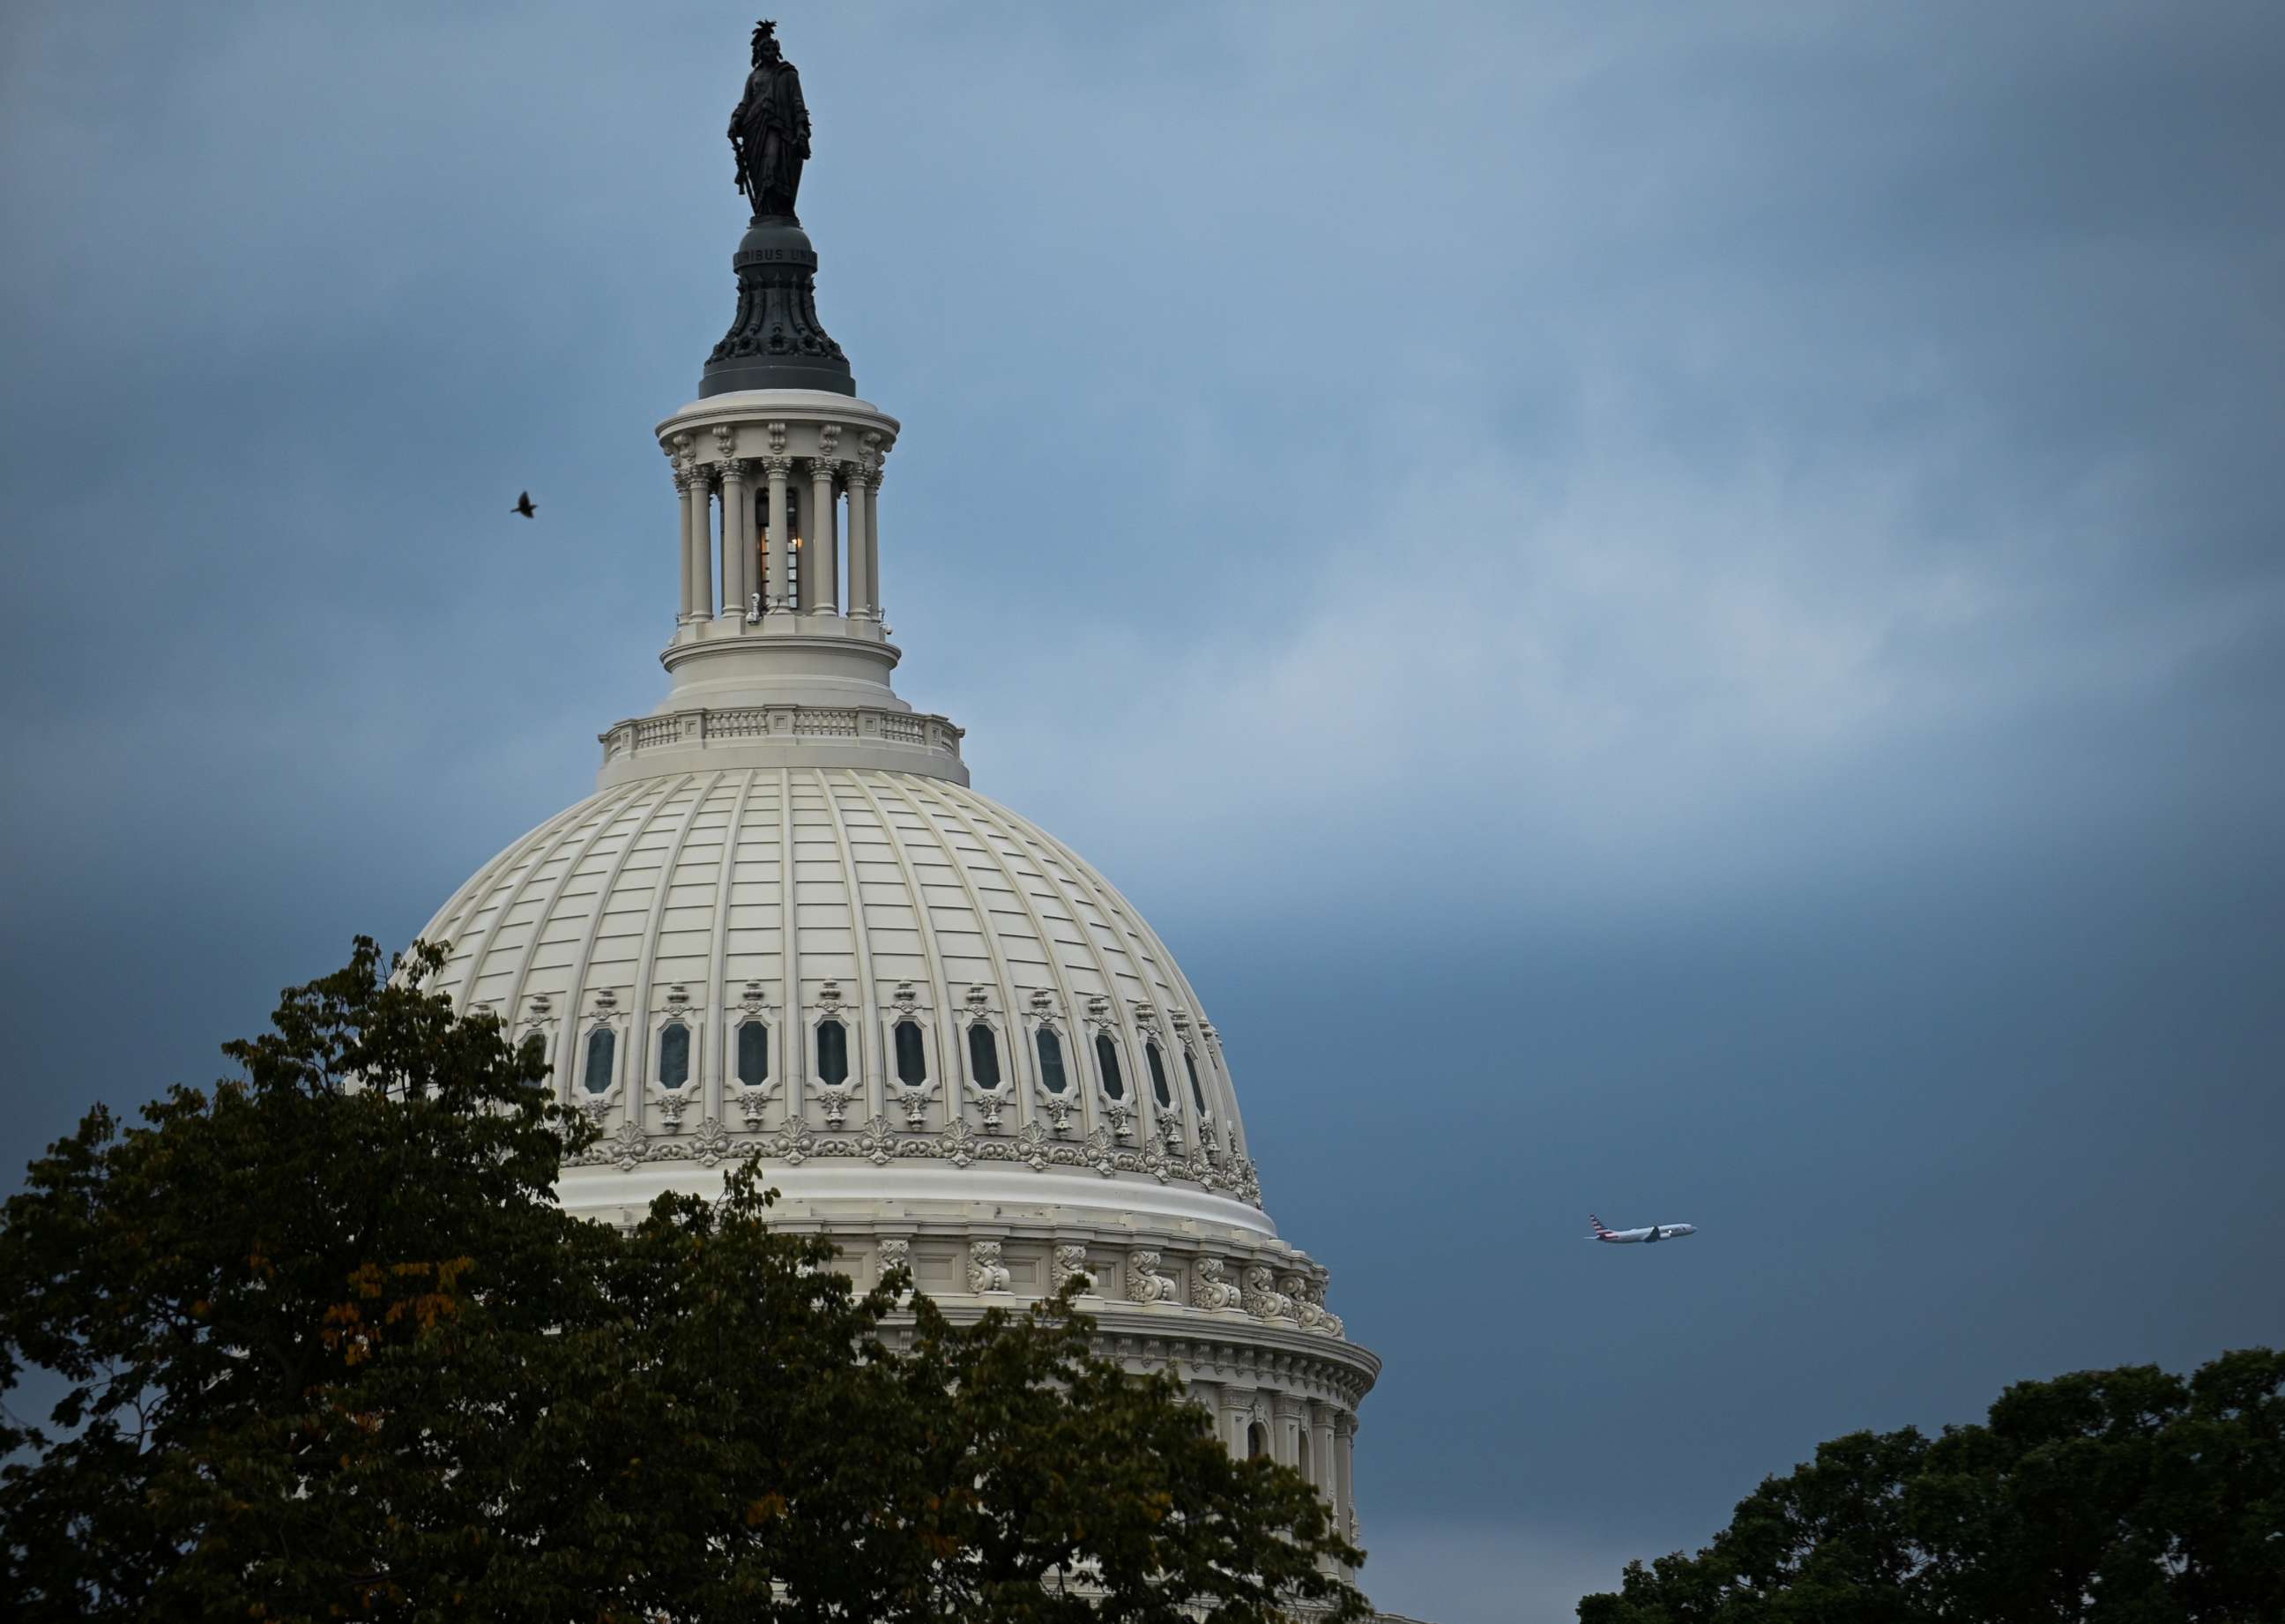 FILE PHOTO: The U.S. Capitol building dome is seen in Washington, U.S., October 1, 2020. REUTERS/Erin Scott/File Photo